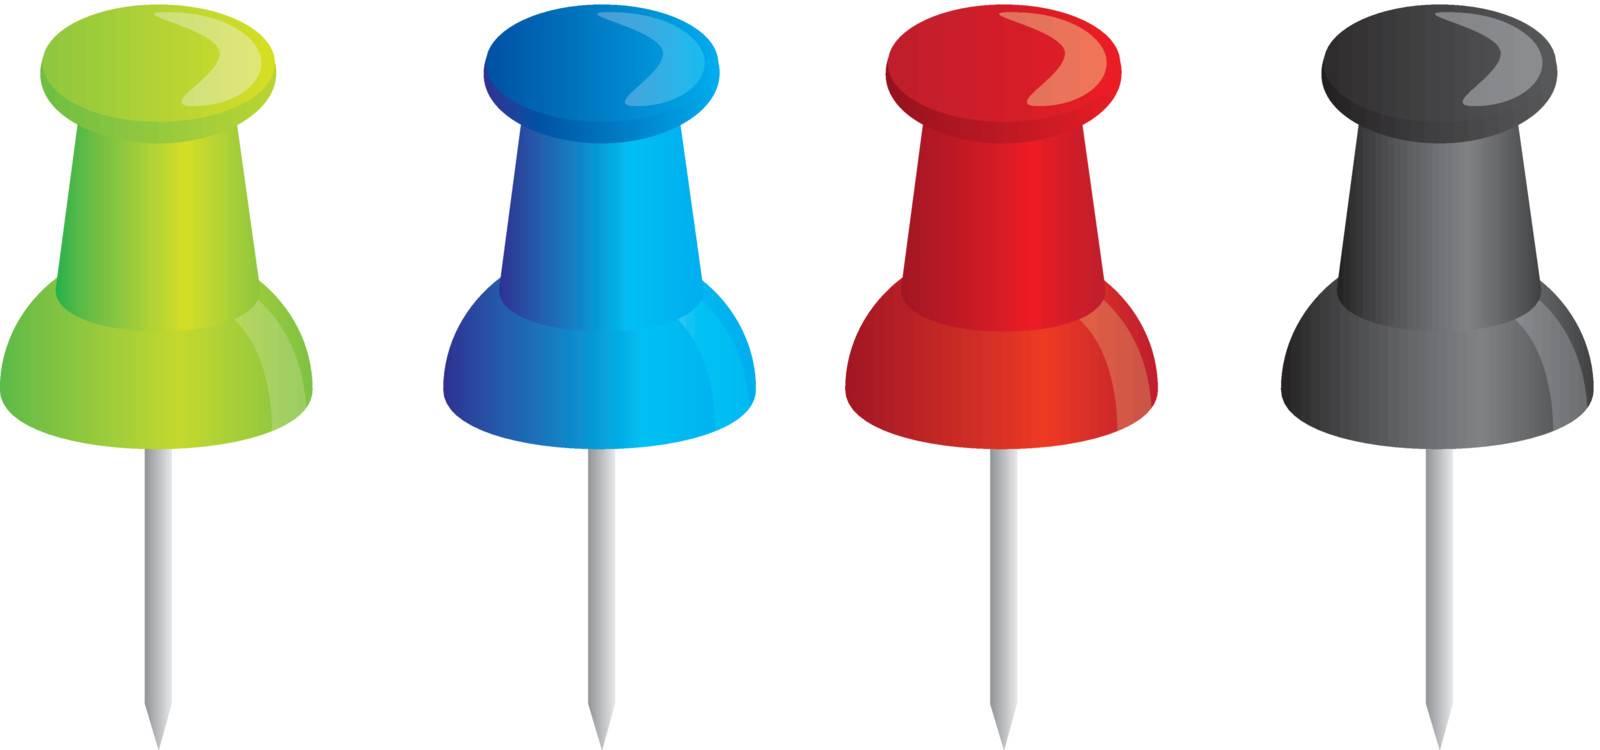 colorful push pin isolated over white background. vector